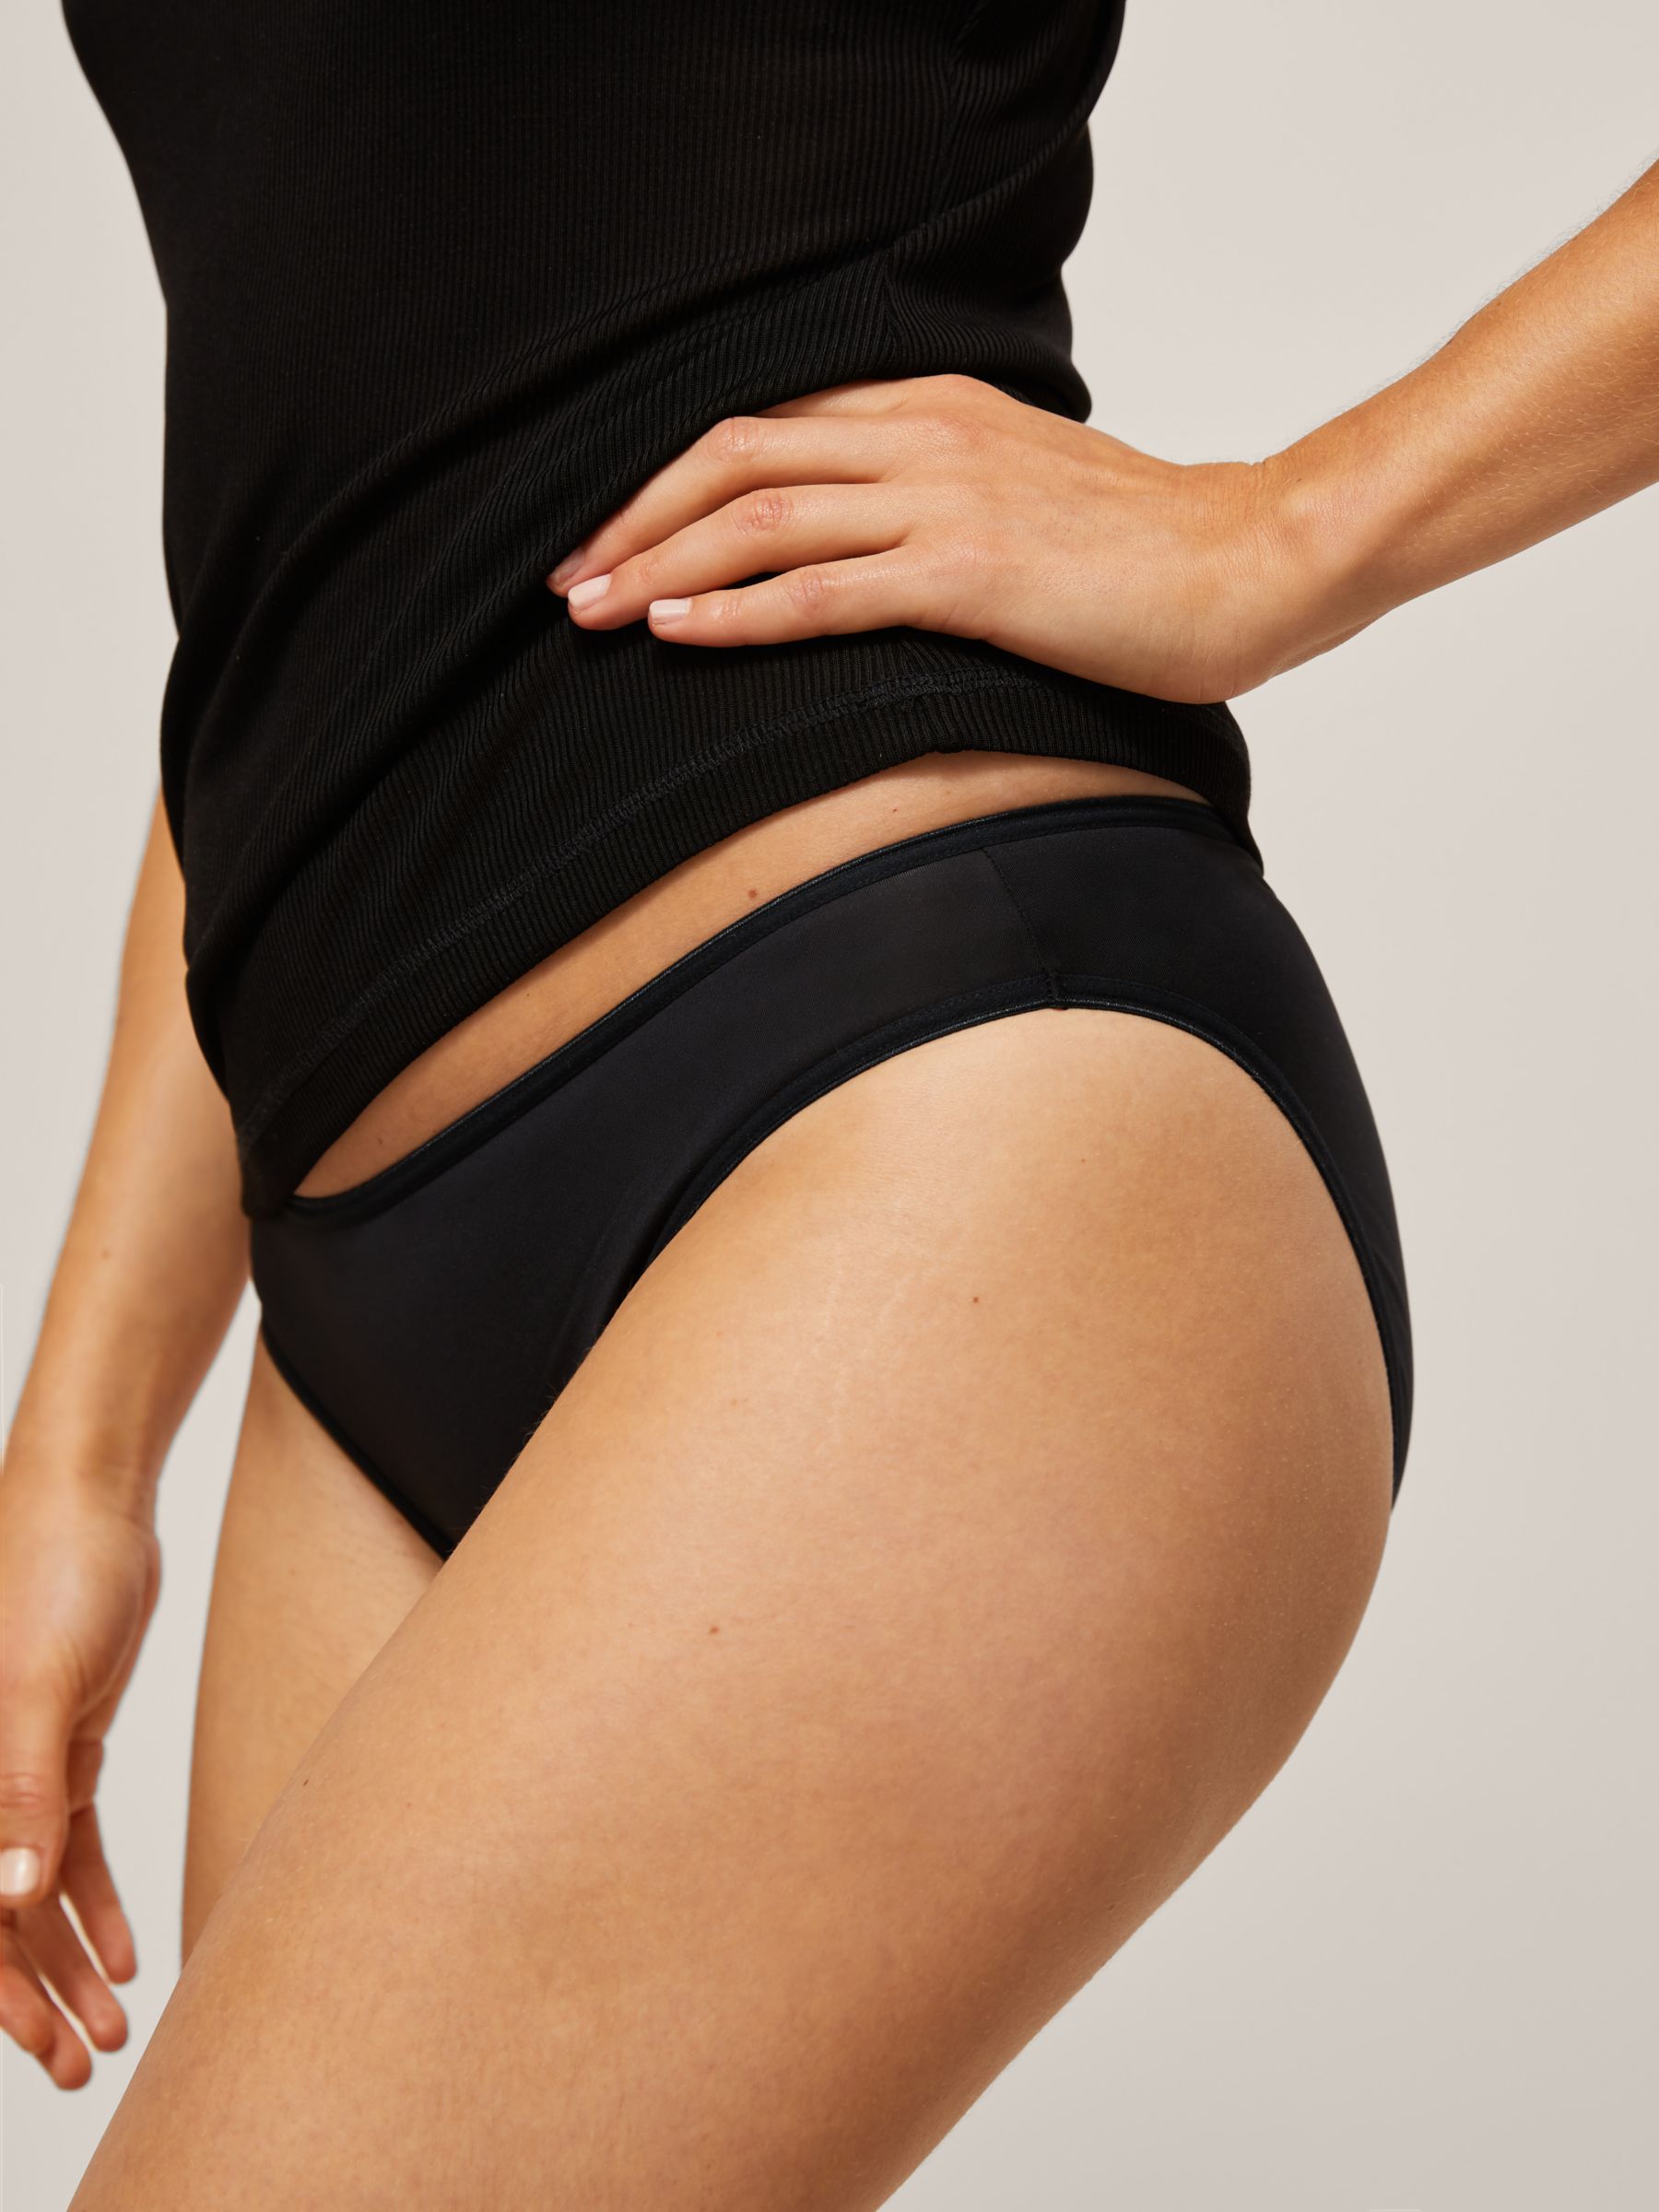 John Lewis ANYDAY No VPL Short Knickers, Pack of 3, Black at John Lewis &  Partners